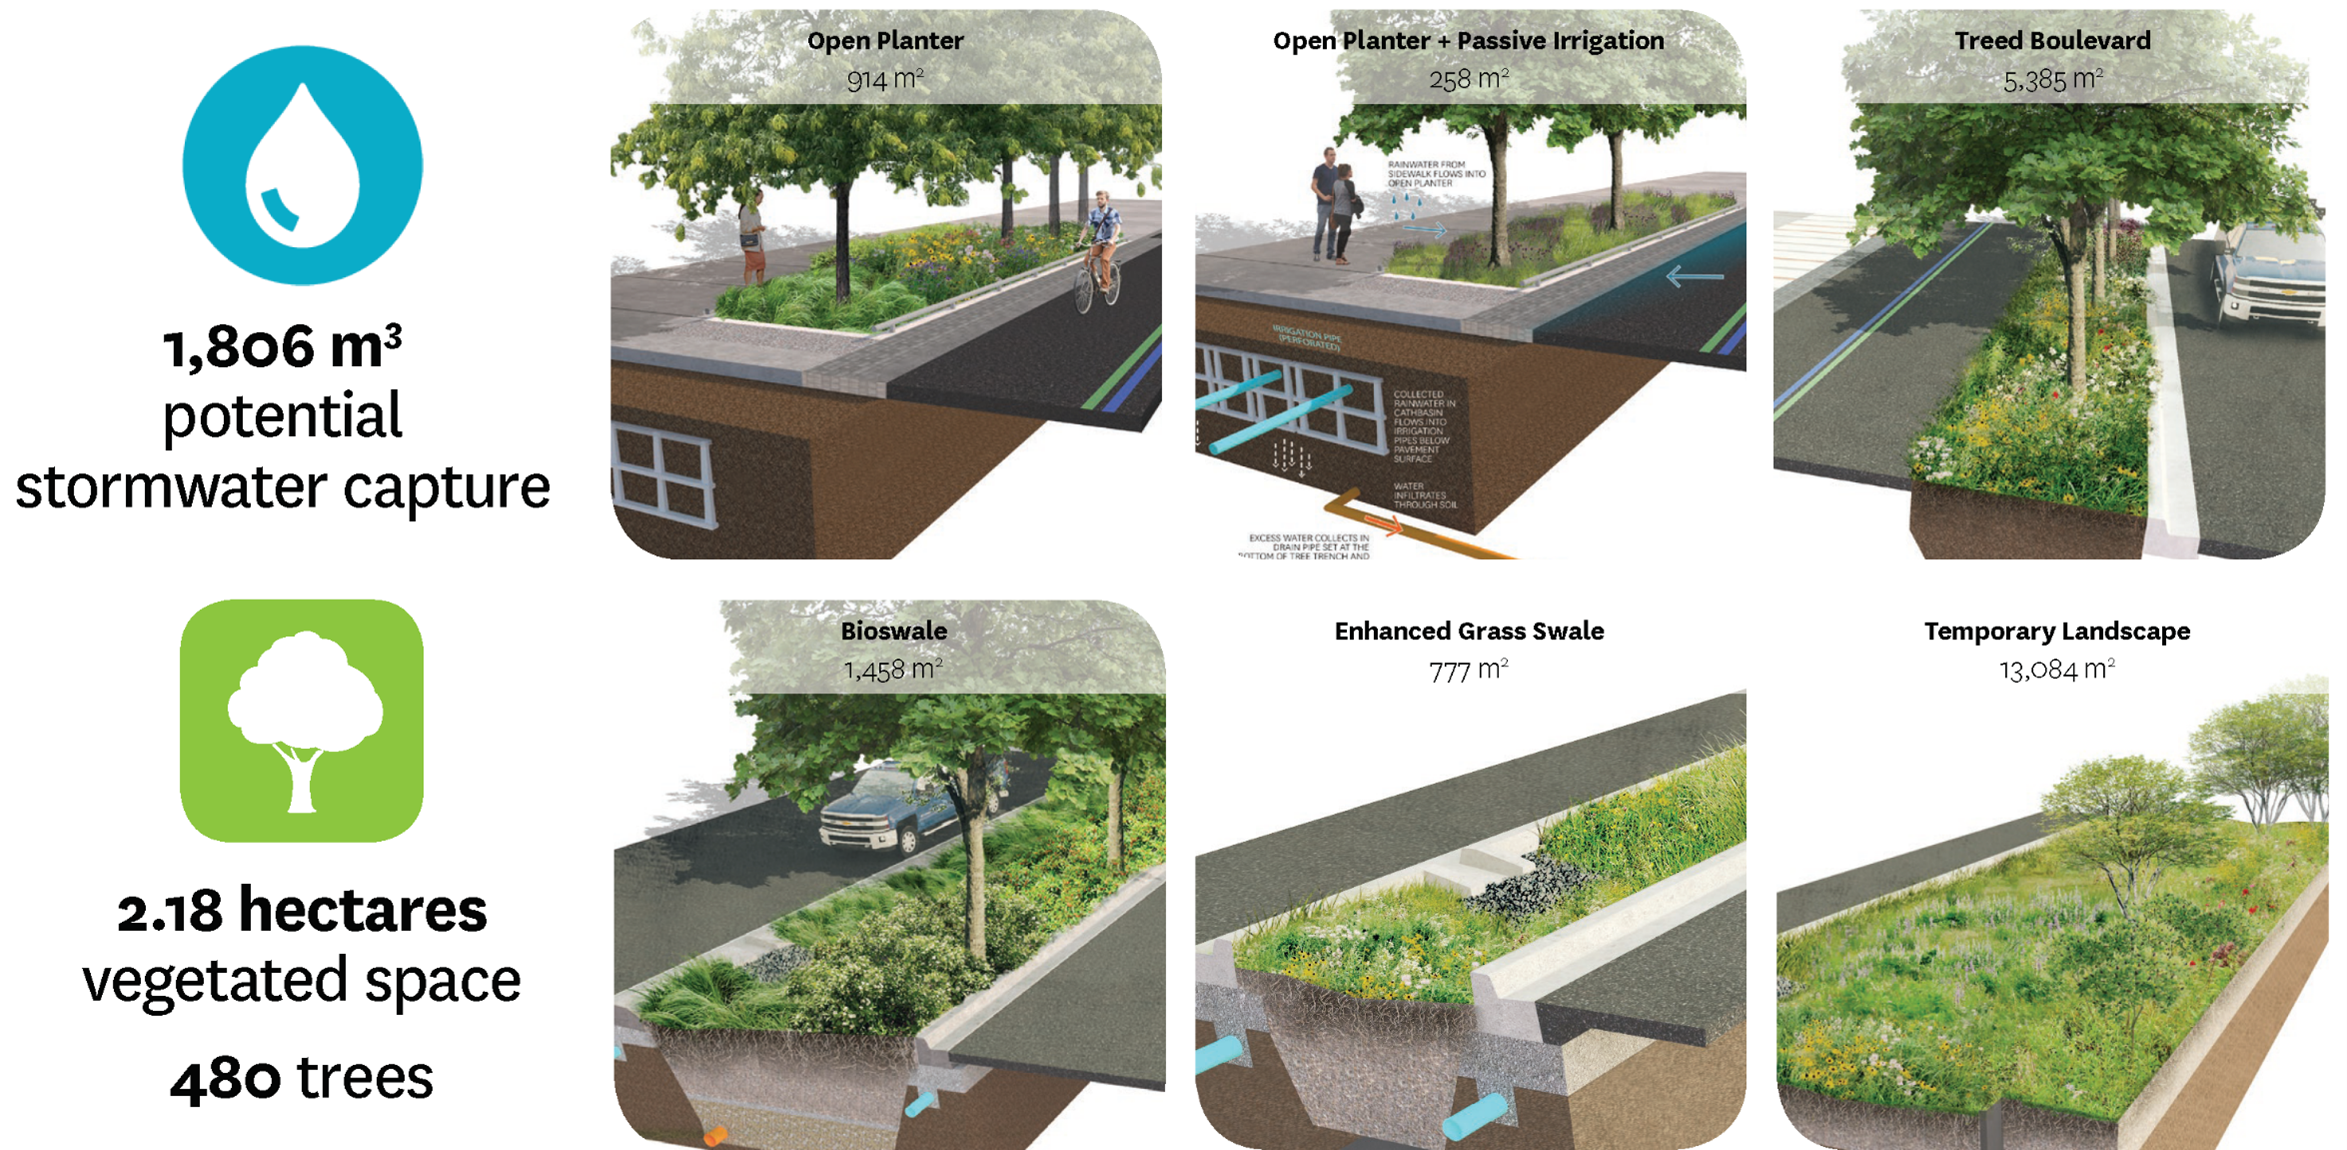 diagram illustrating potential stormwater capture and vegetated space